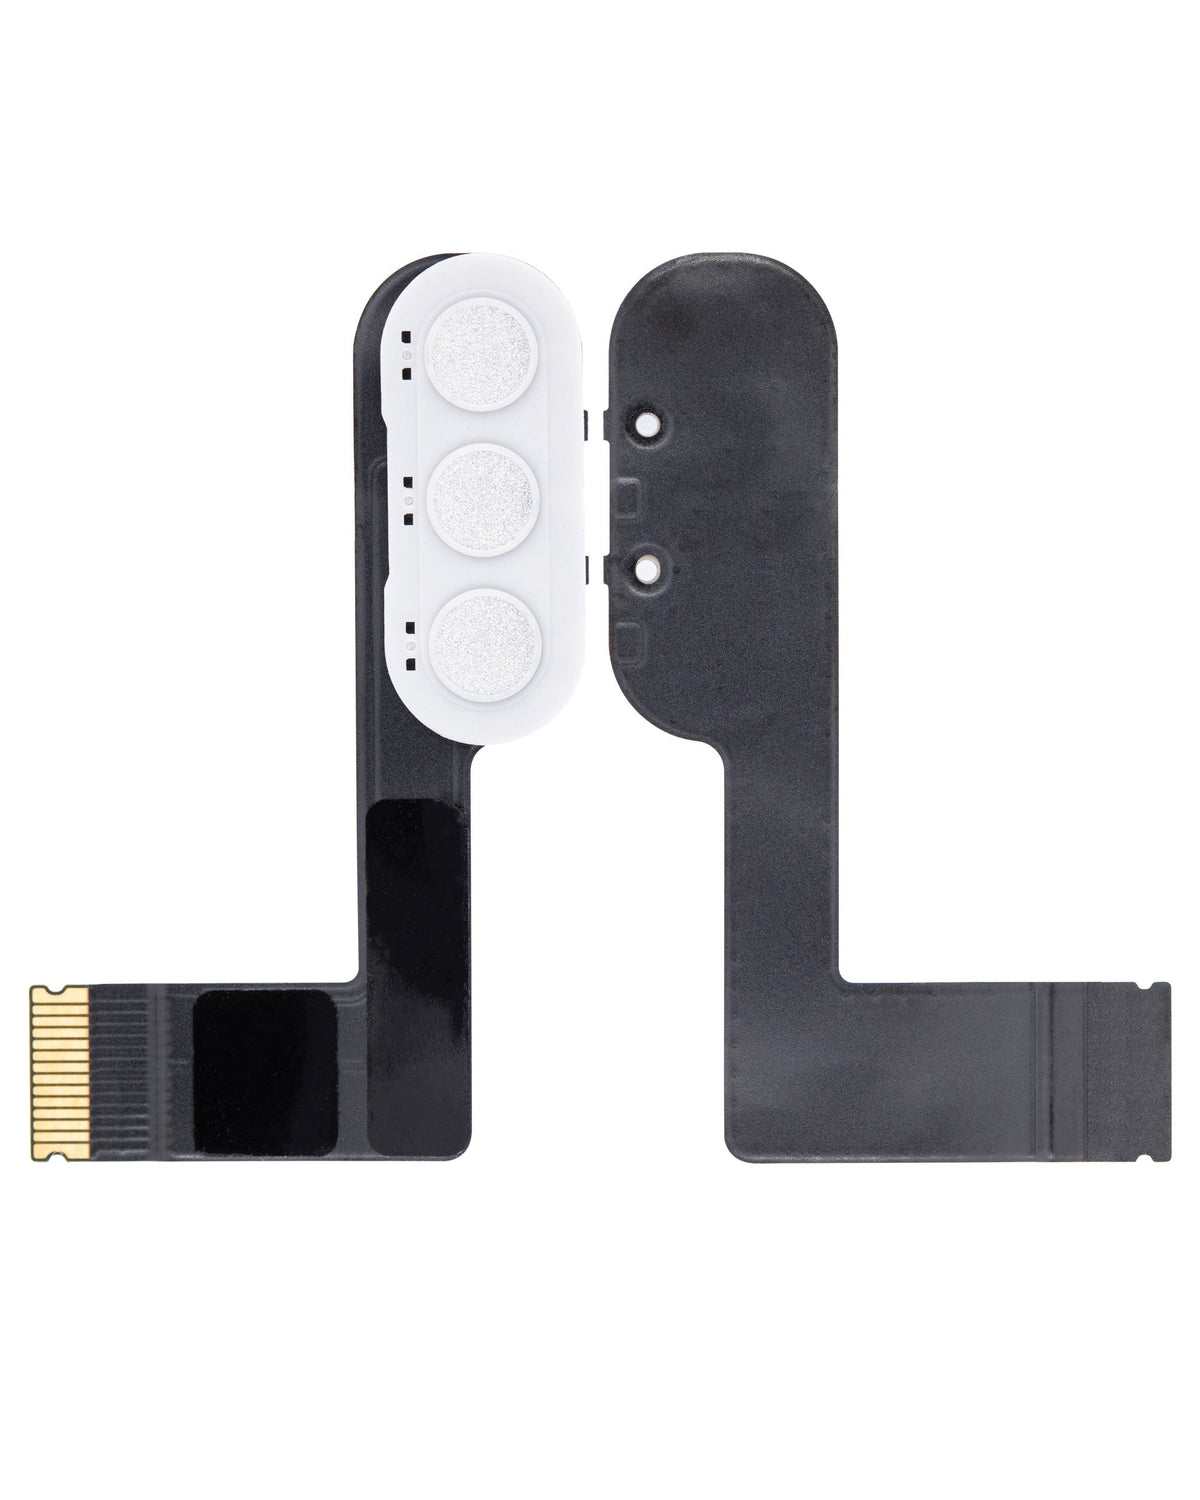 KEYBOARD FLEX CABLE COMPATIBLE FOR IPAD AIR 4/5 - SILVER